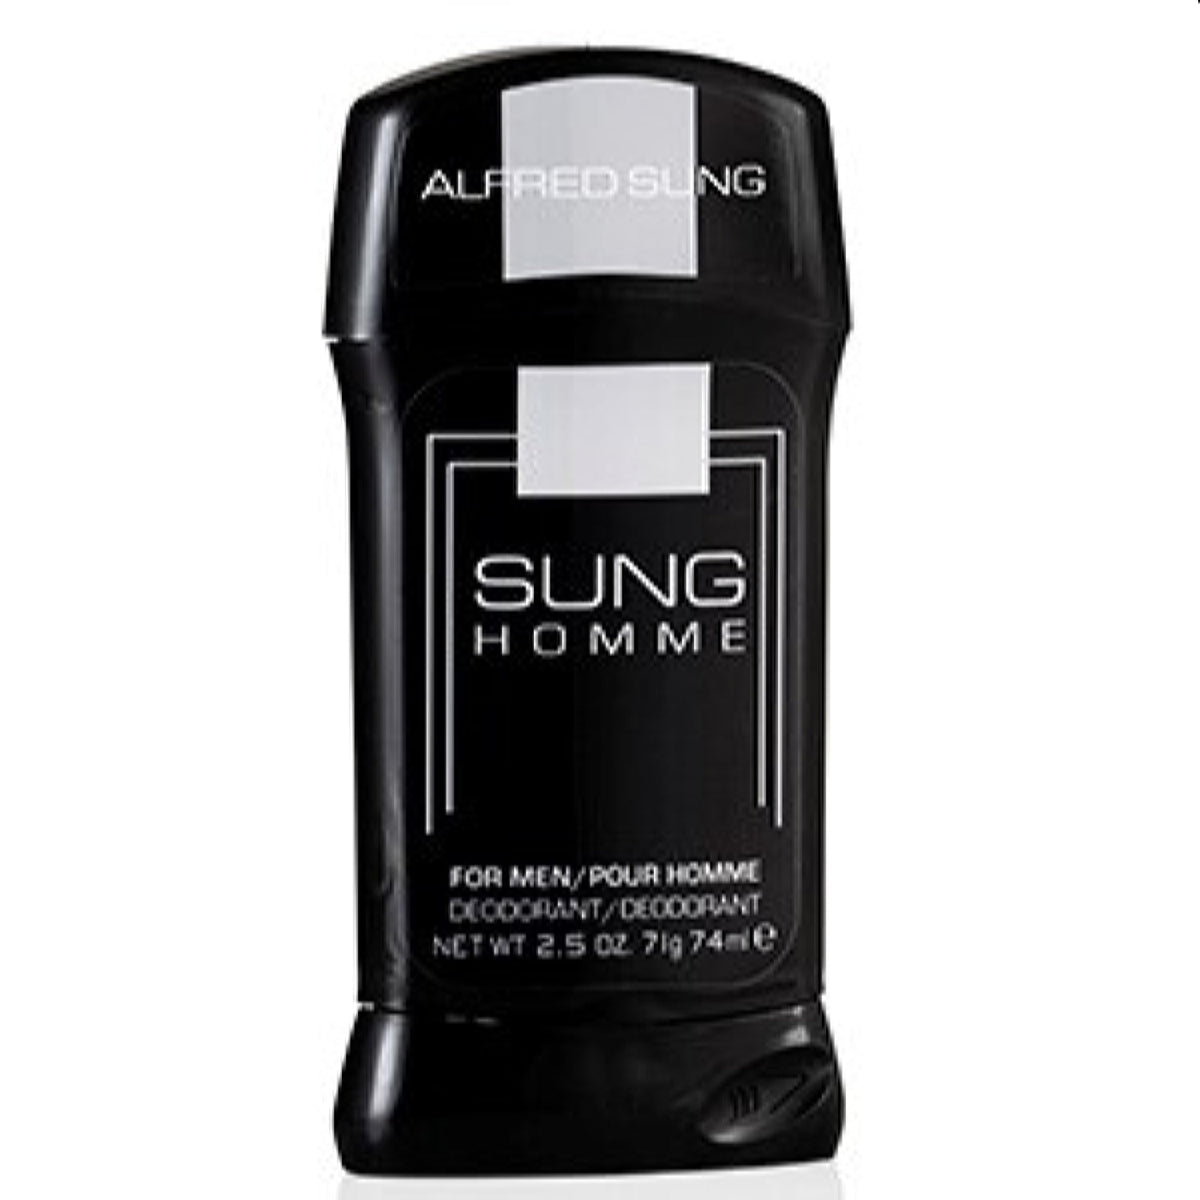 Sung Homme Alfred Sung Deodorant Stick 2.5 Oz (74 Ml) For Men A0104709